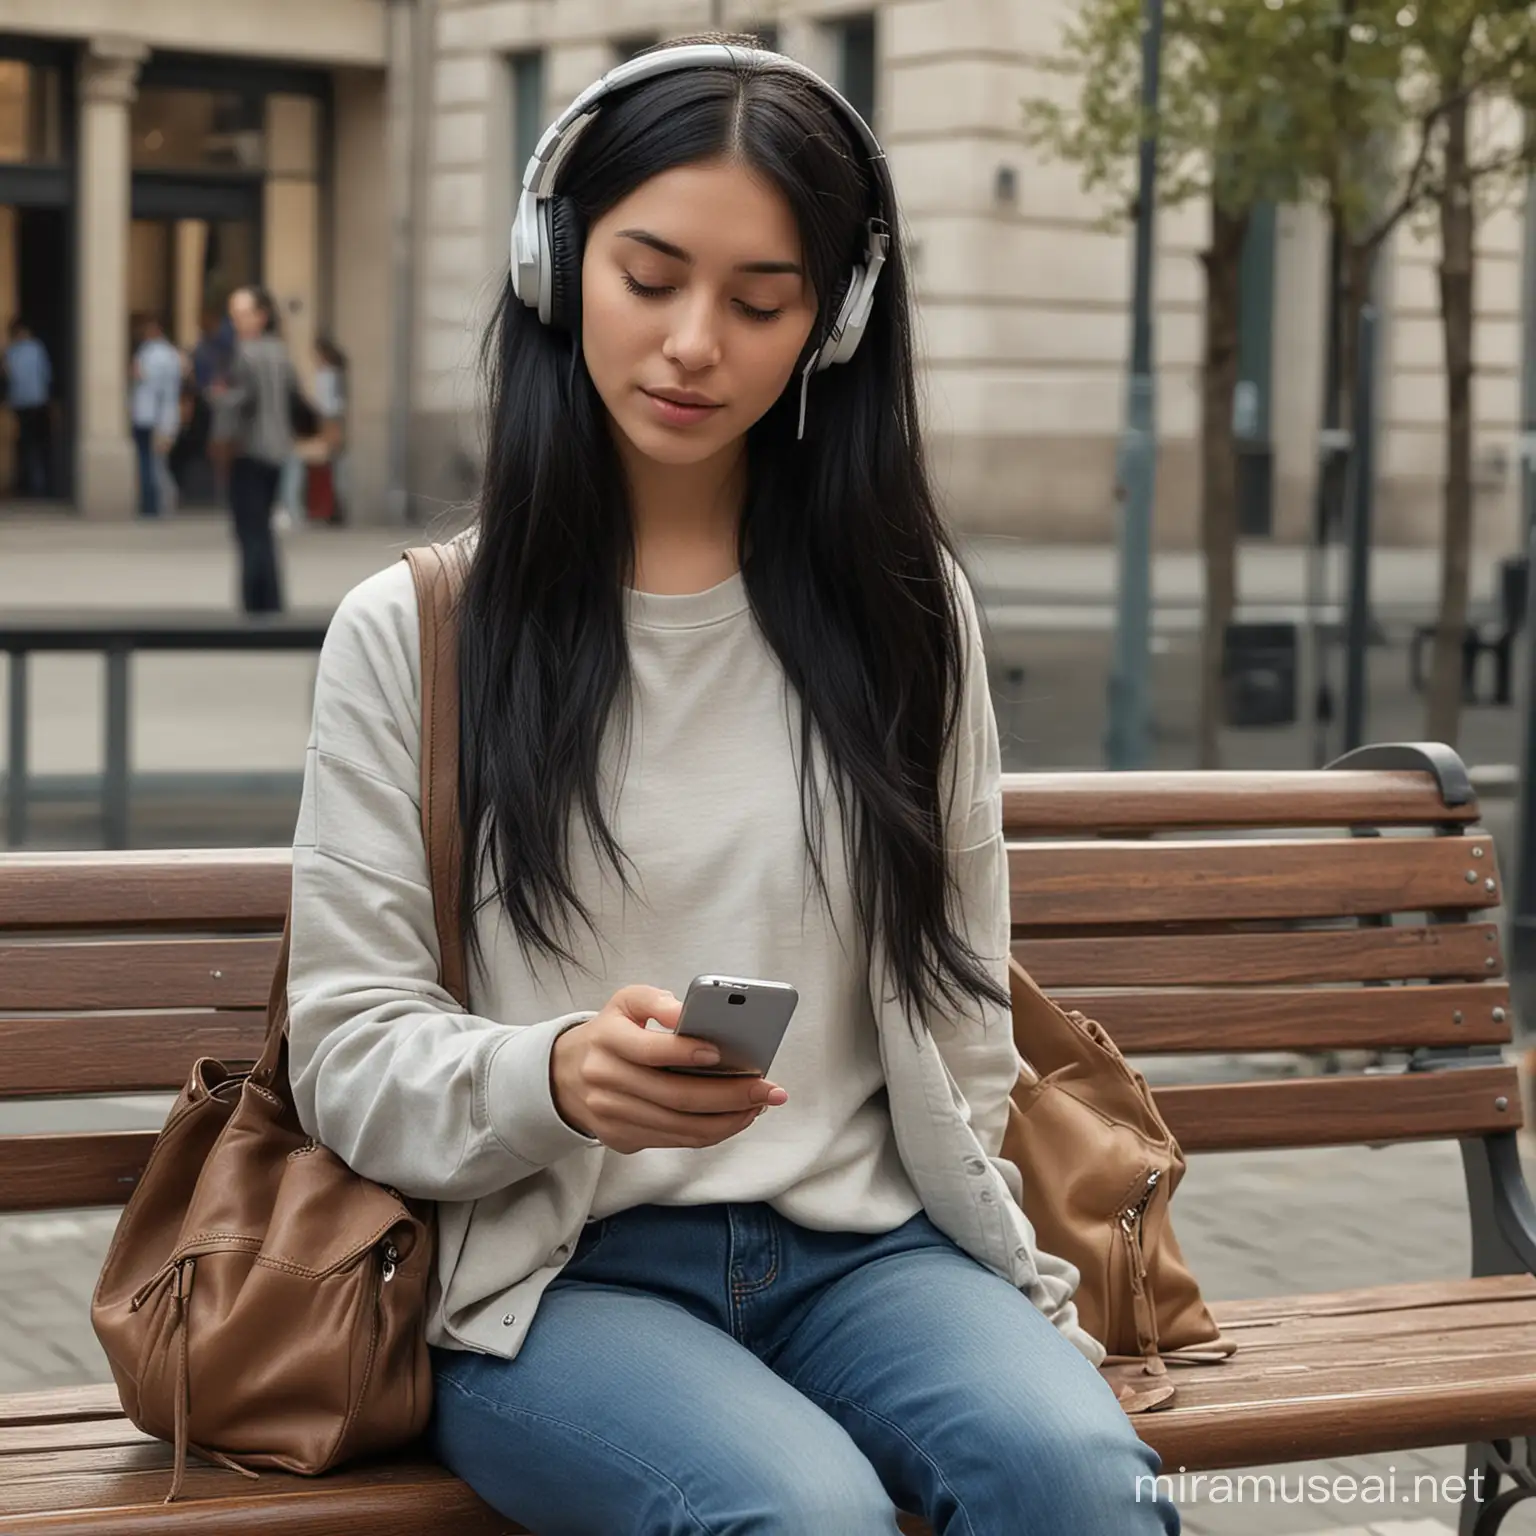 A modern-day urban scene of a young woman with long black hair sitting on a bench, listening to music on her phone with headphones, holding a smartphone in one hand, a bag beside her, wearing long sleeves and pants, detailed realism, solo, square orientation. --s 150 --ar 1:1 --c 5